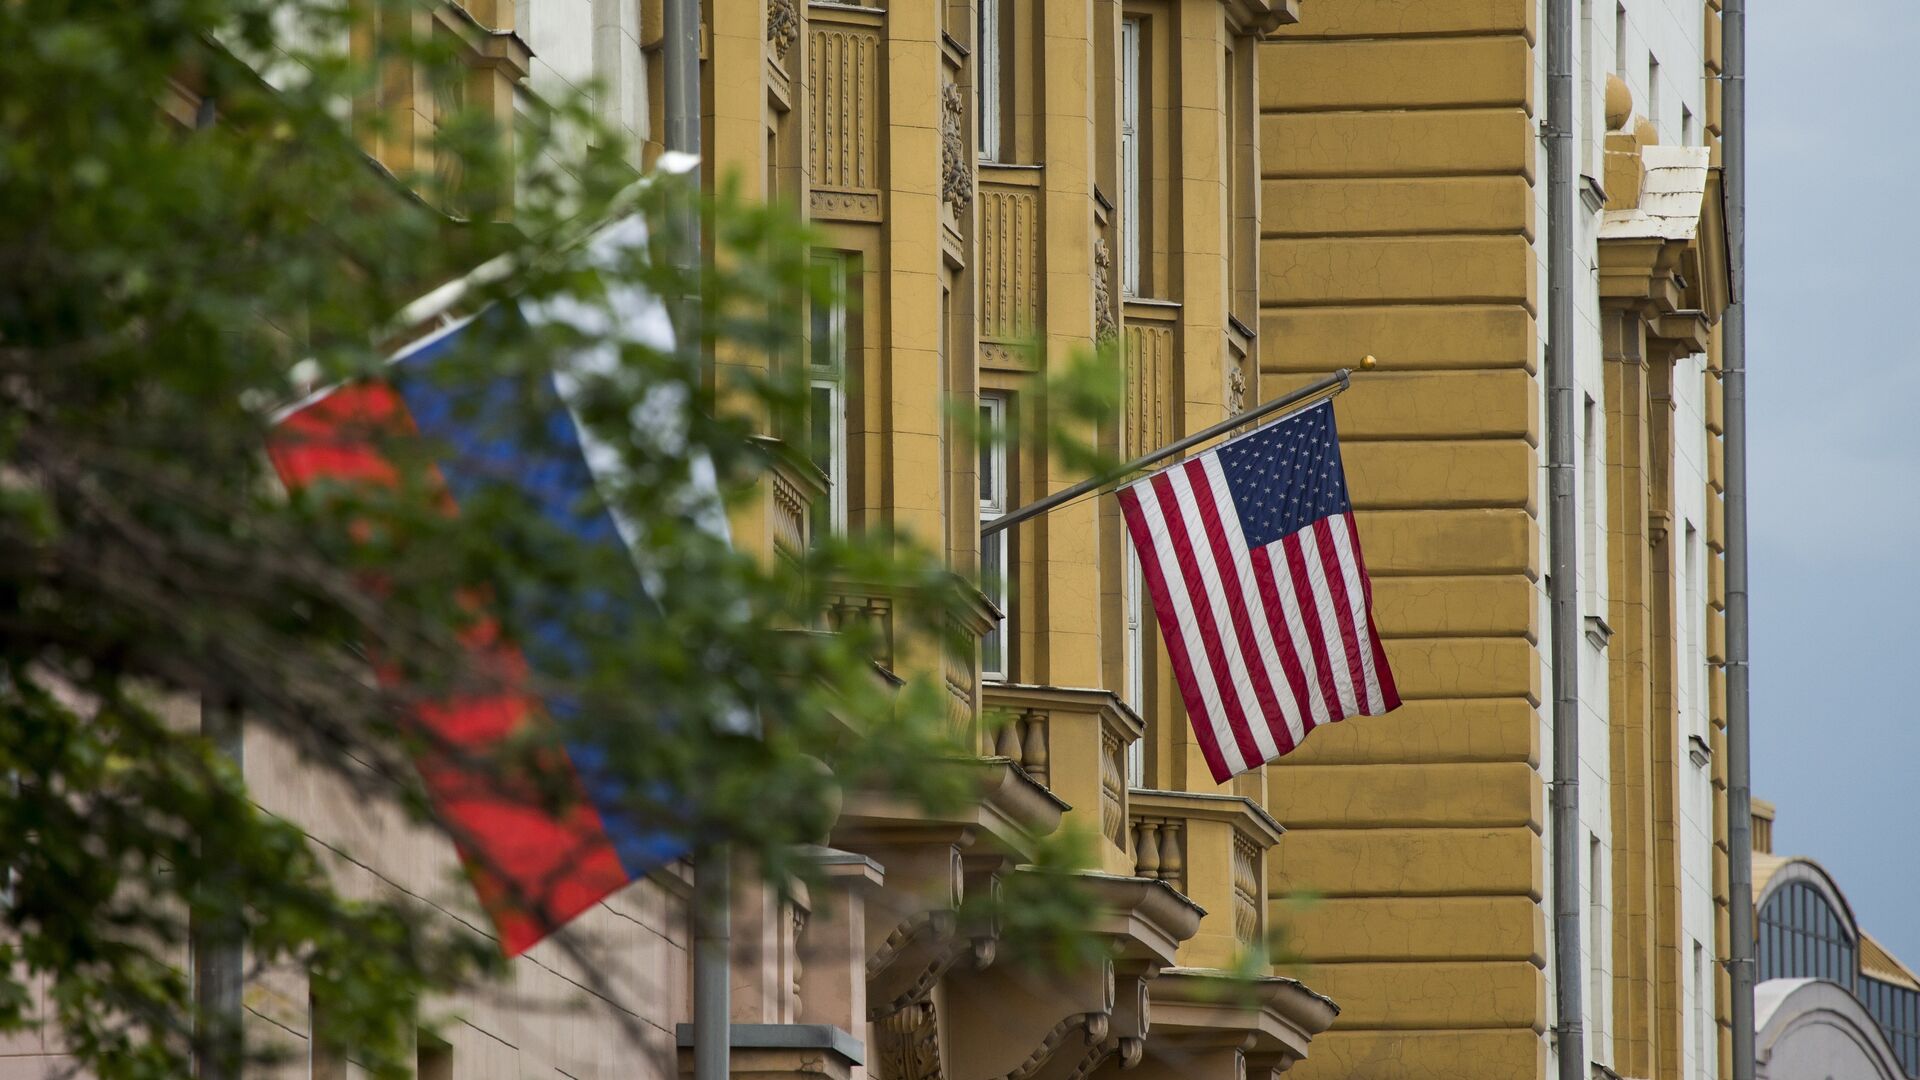 U.S. and Russian flags hung at the U.S. Embassy in Moscow, Russia, Friday, July 28, 2017 - Sputnik International, 1920, 04.06.2022